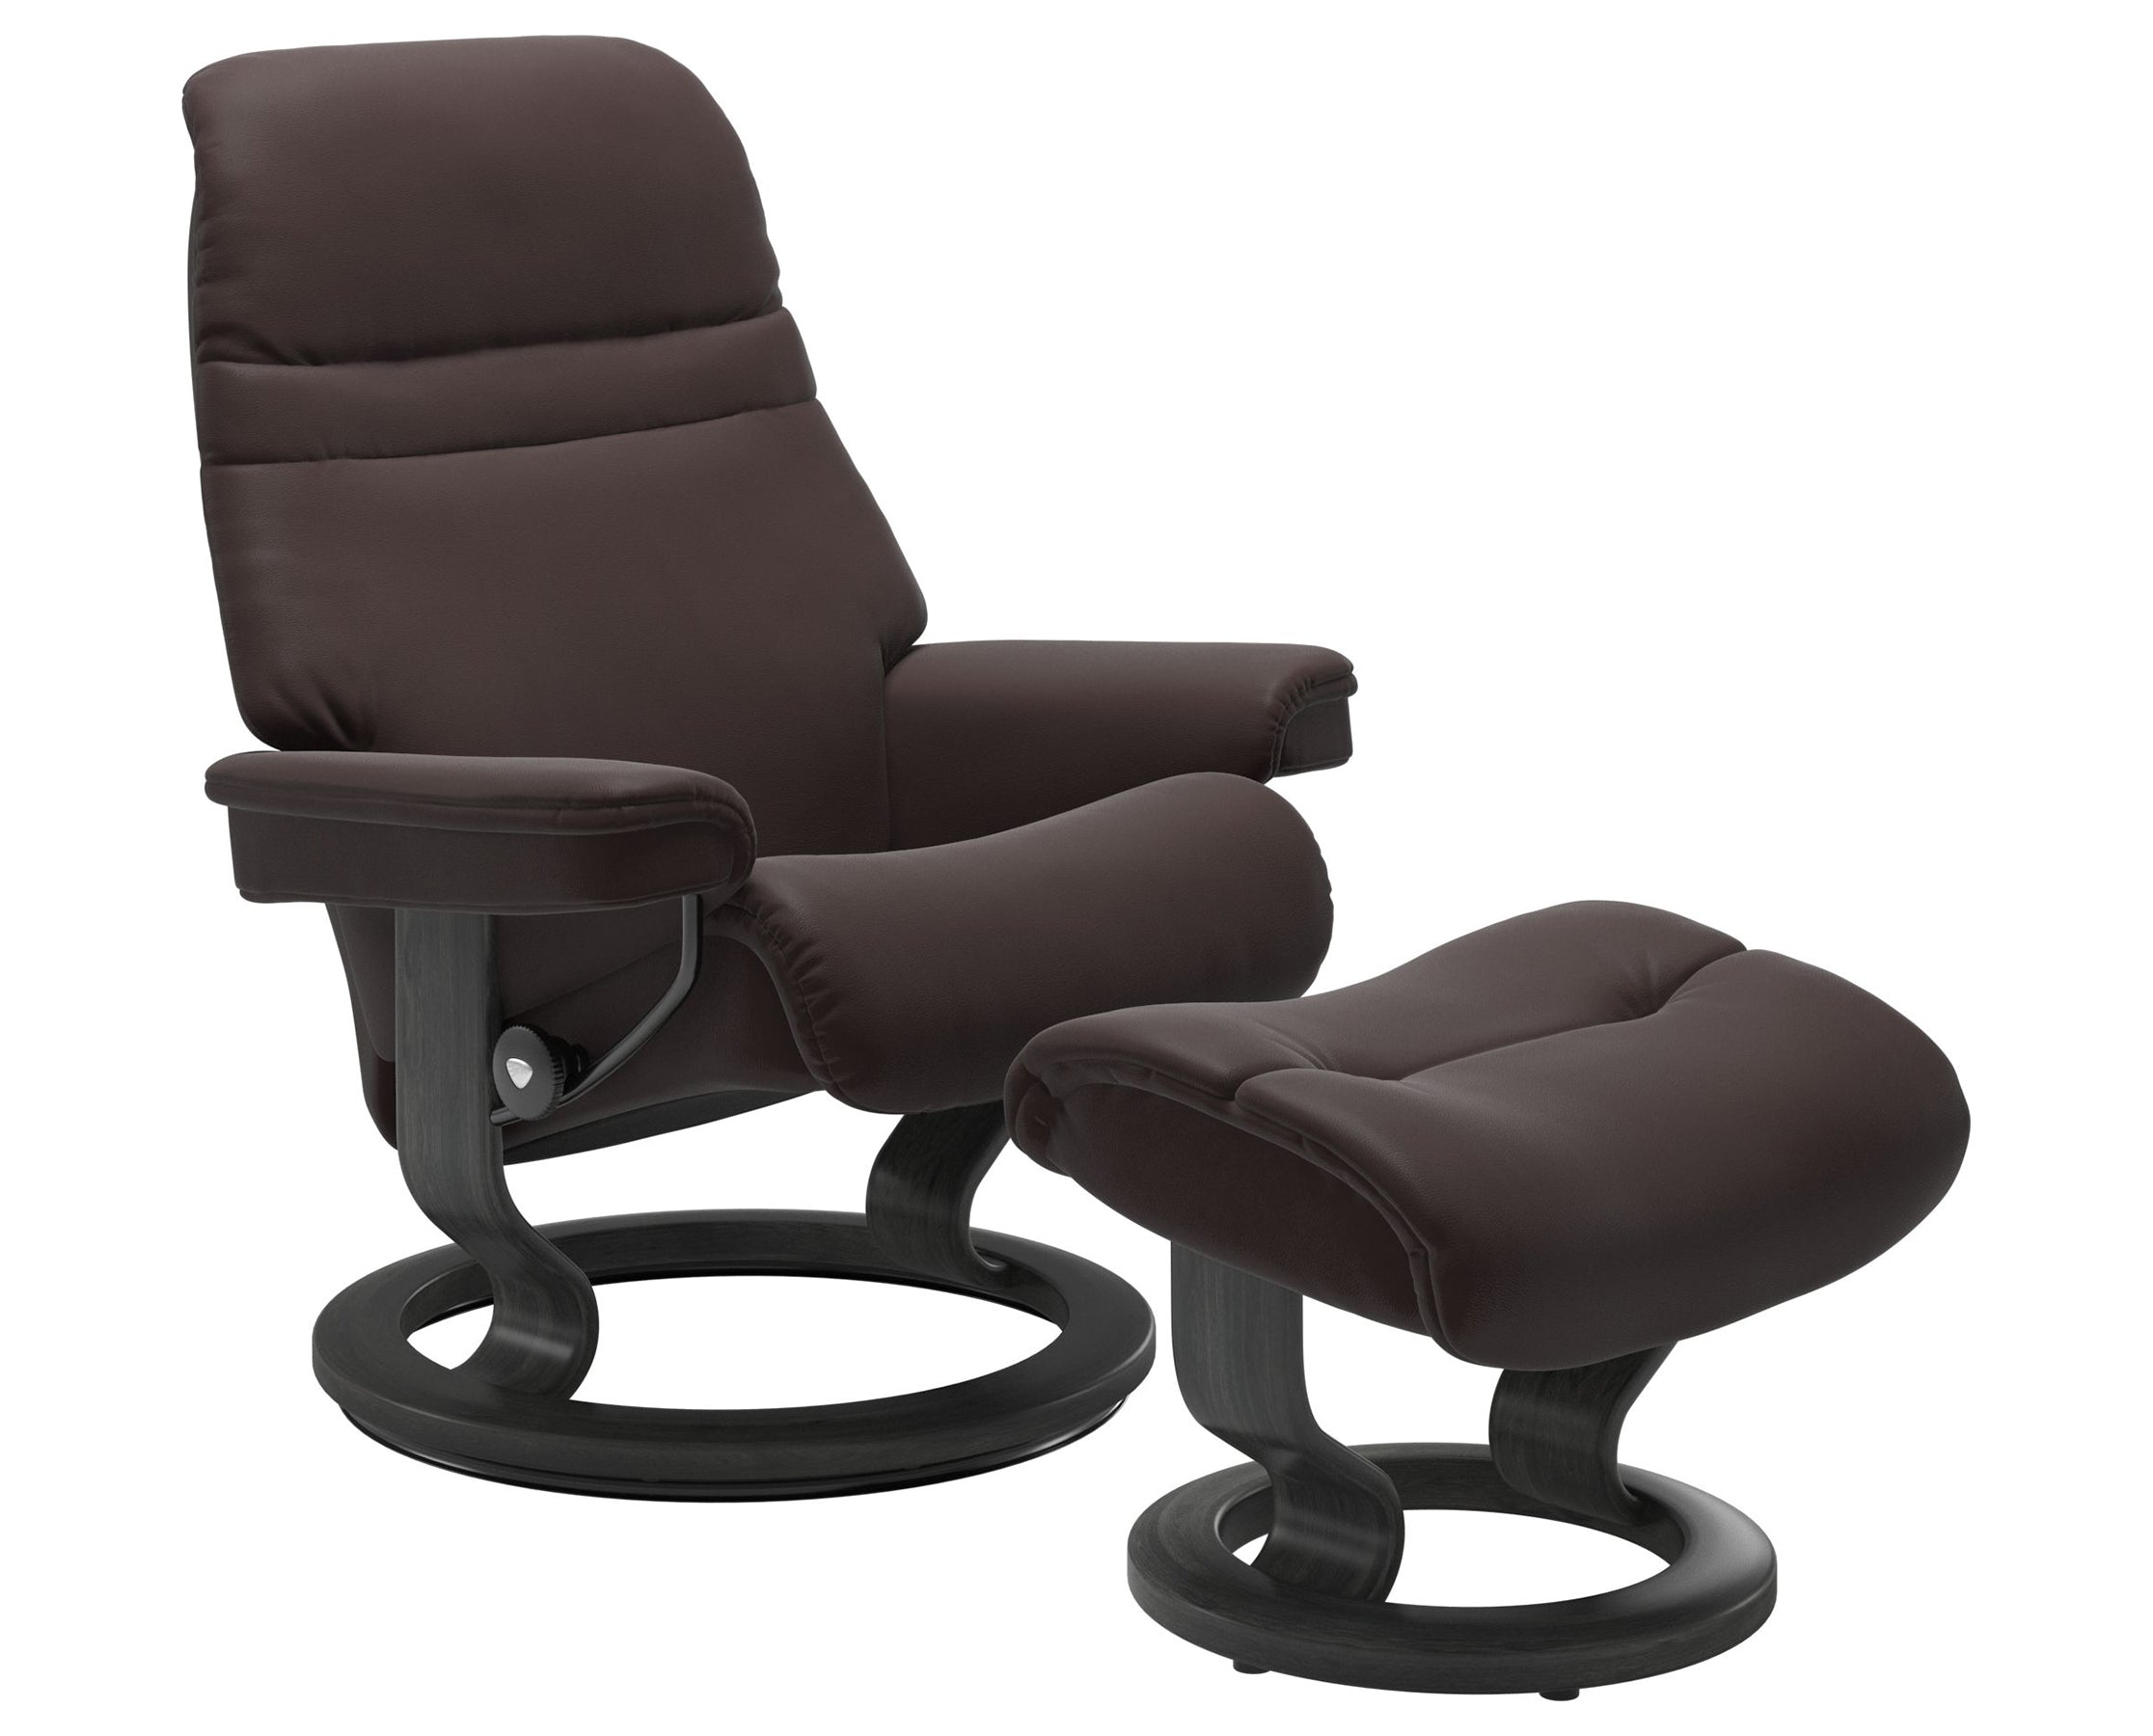 Paloma Leather Chocolate S/M/L and Grey Base | Stressless Sunrise Classic Recliner | Valley Ridge Furniture